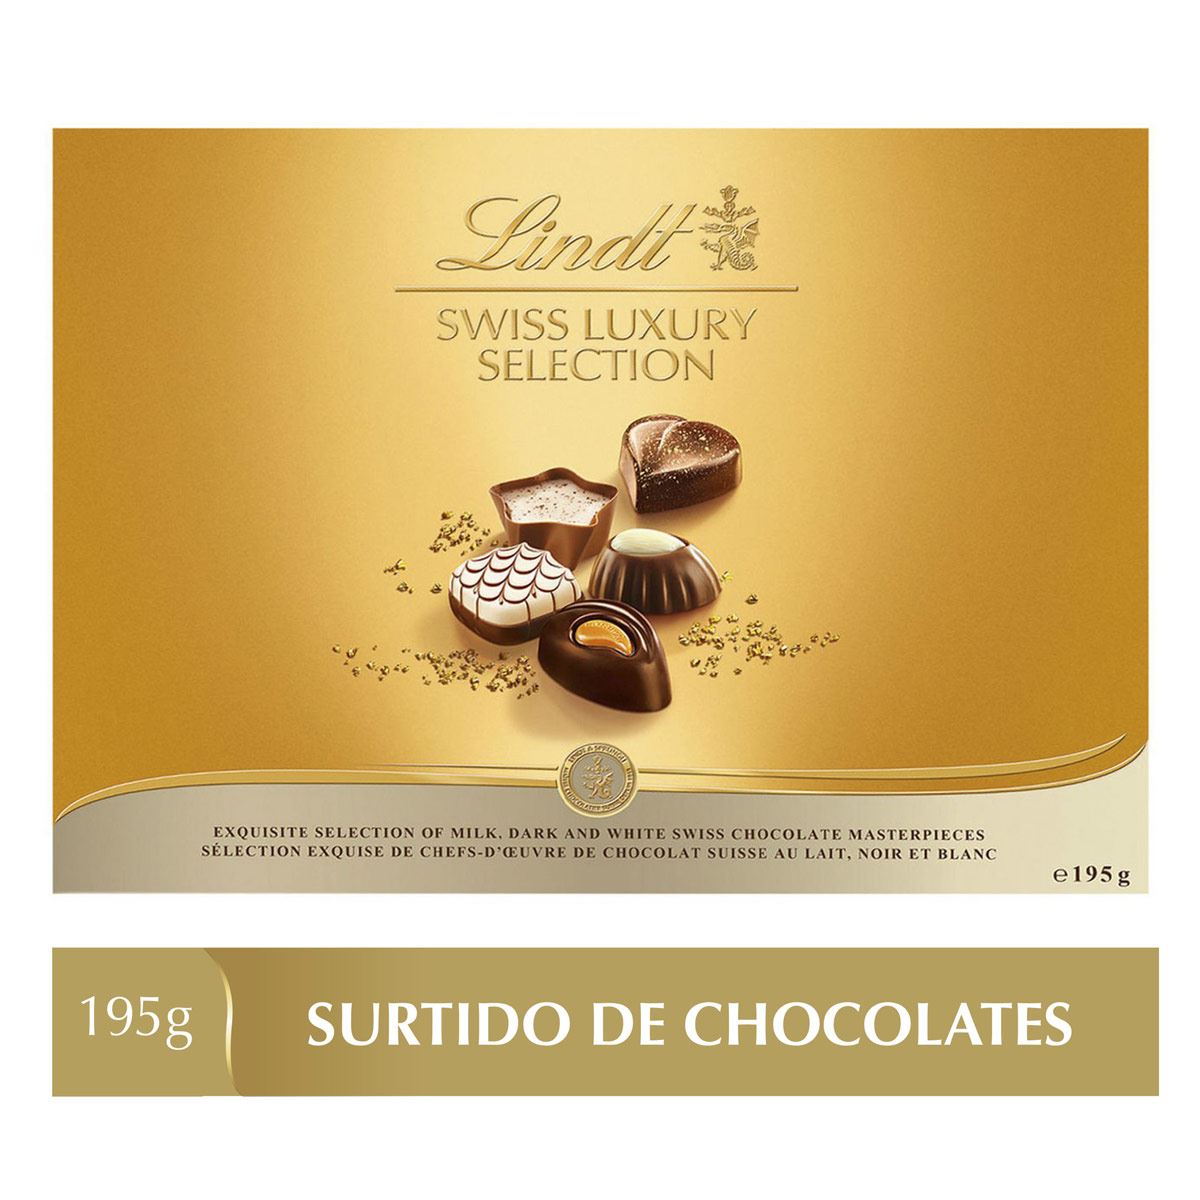 Lindt Swiss Luxury Selection,195g